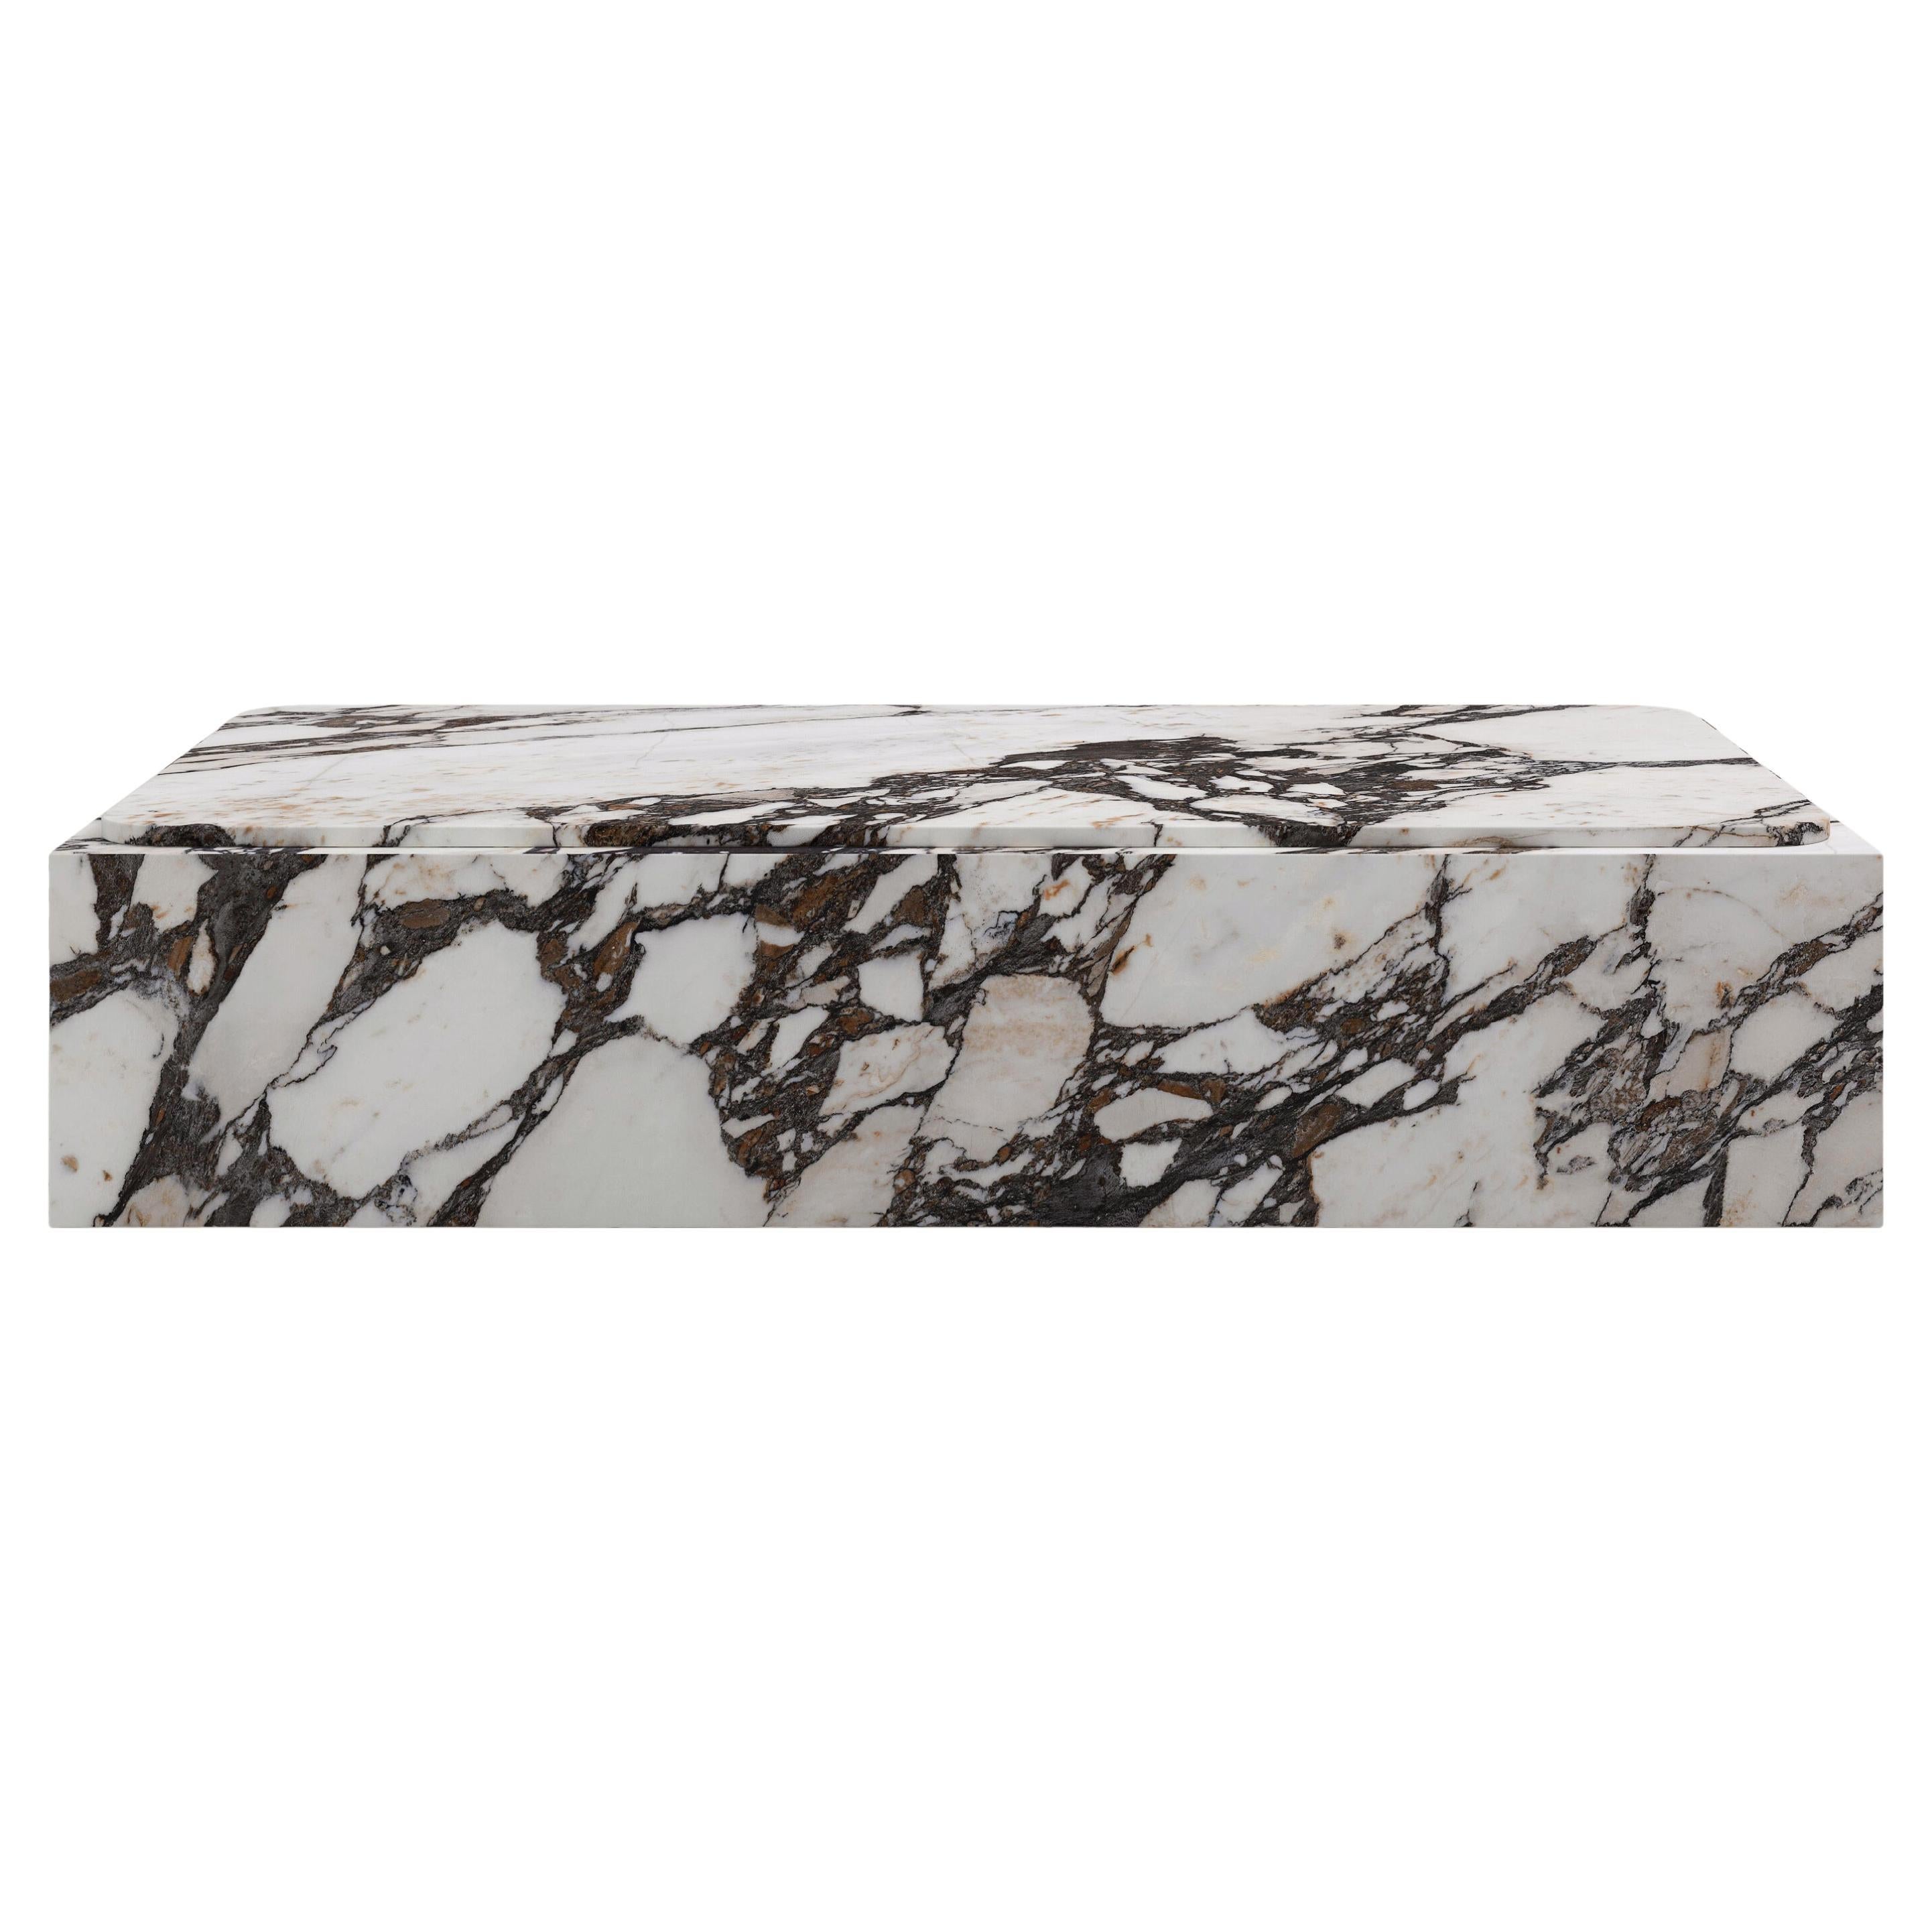 FORM(LA) Cubo Rectangle Plinth Coffee Table 60”L x 36”W x 13”H Calacatta Marble For Sale